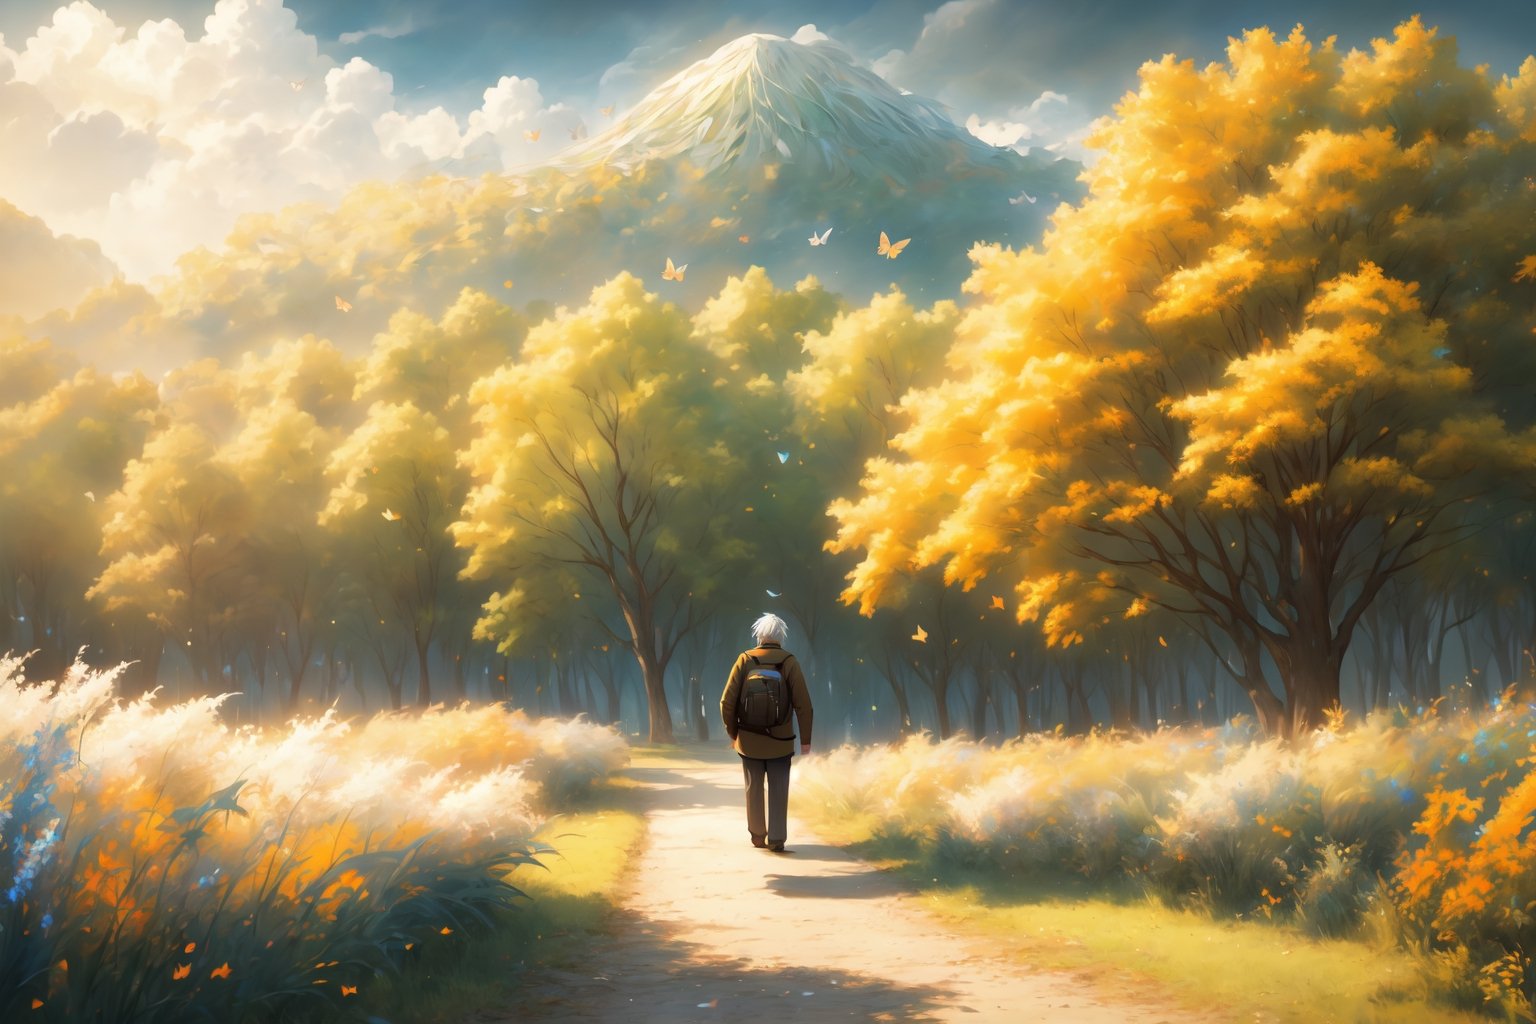  Alone, solo, realistic, masterpiece,best quality,High definition, (realistic lighting, sharp focus), high resolution, volumetric light,, From behind, A man walking alone in a green valley, A day of spring
, Light theme, White hair ,falling leaves, dim light, flowers, beauty day, cloudy sky, traveler backpack, tree leaves in the air, butterflies, light dust

